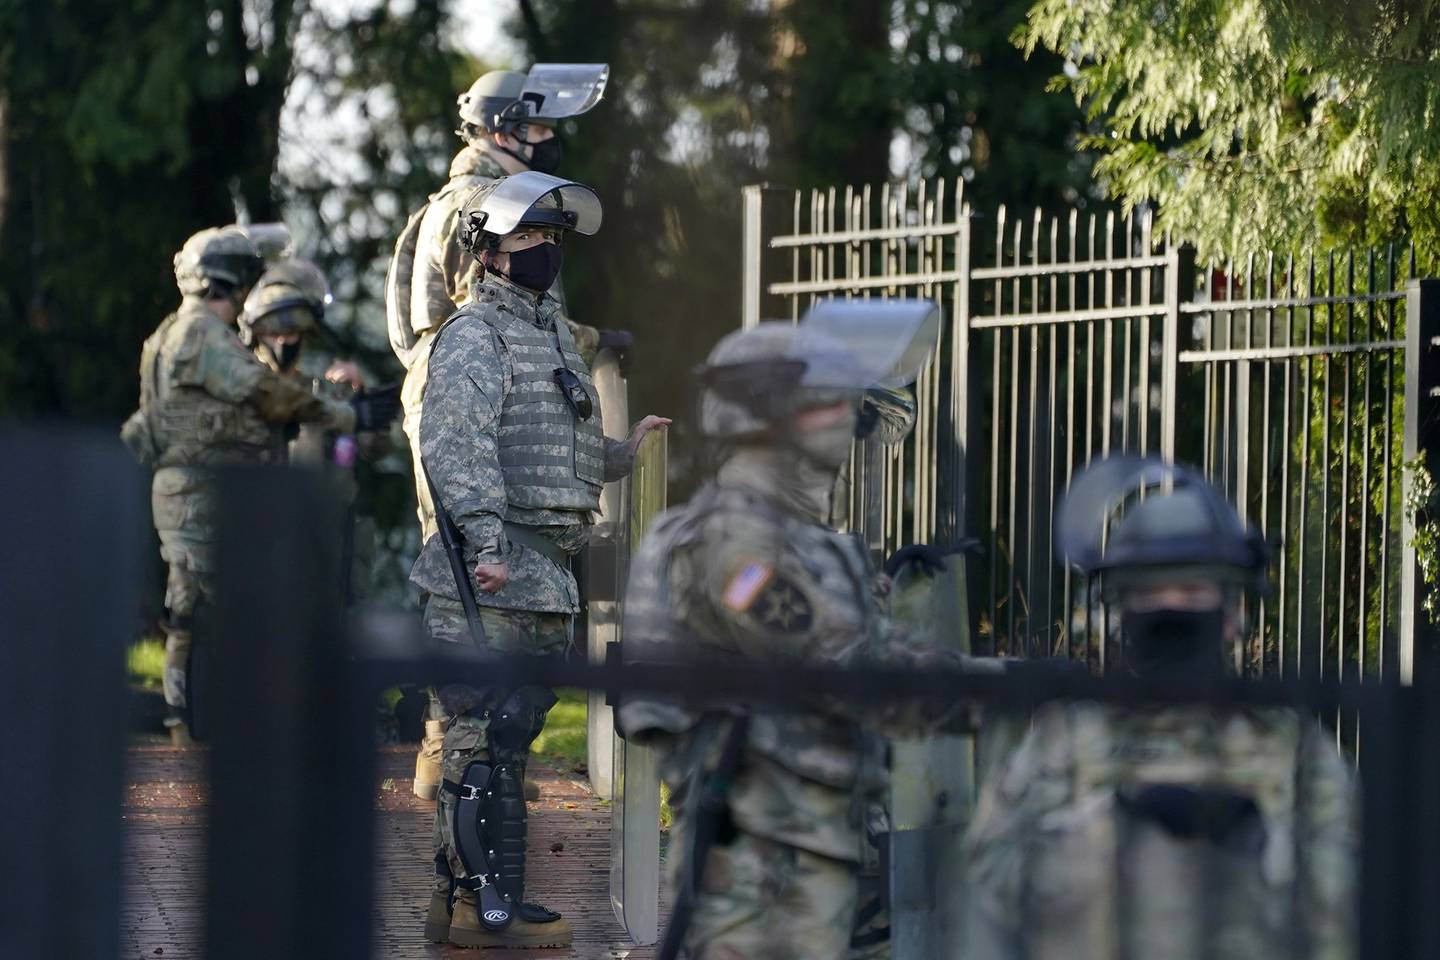 Members of the Washington National Guard stand along a perimeter fence at the Governor's Mansion, Sunday, Jan. 10, 2021, at the Capitol in Olympia, Wash.